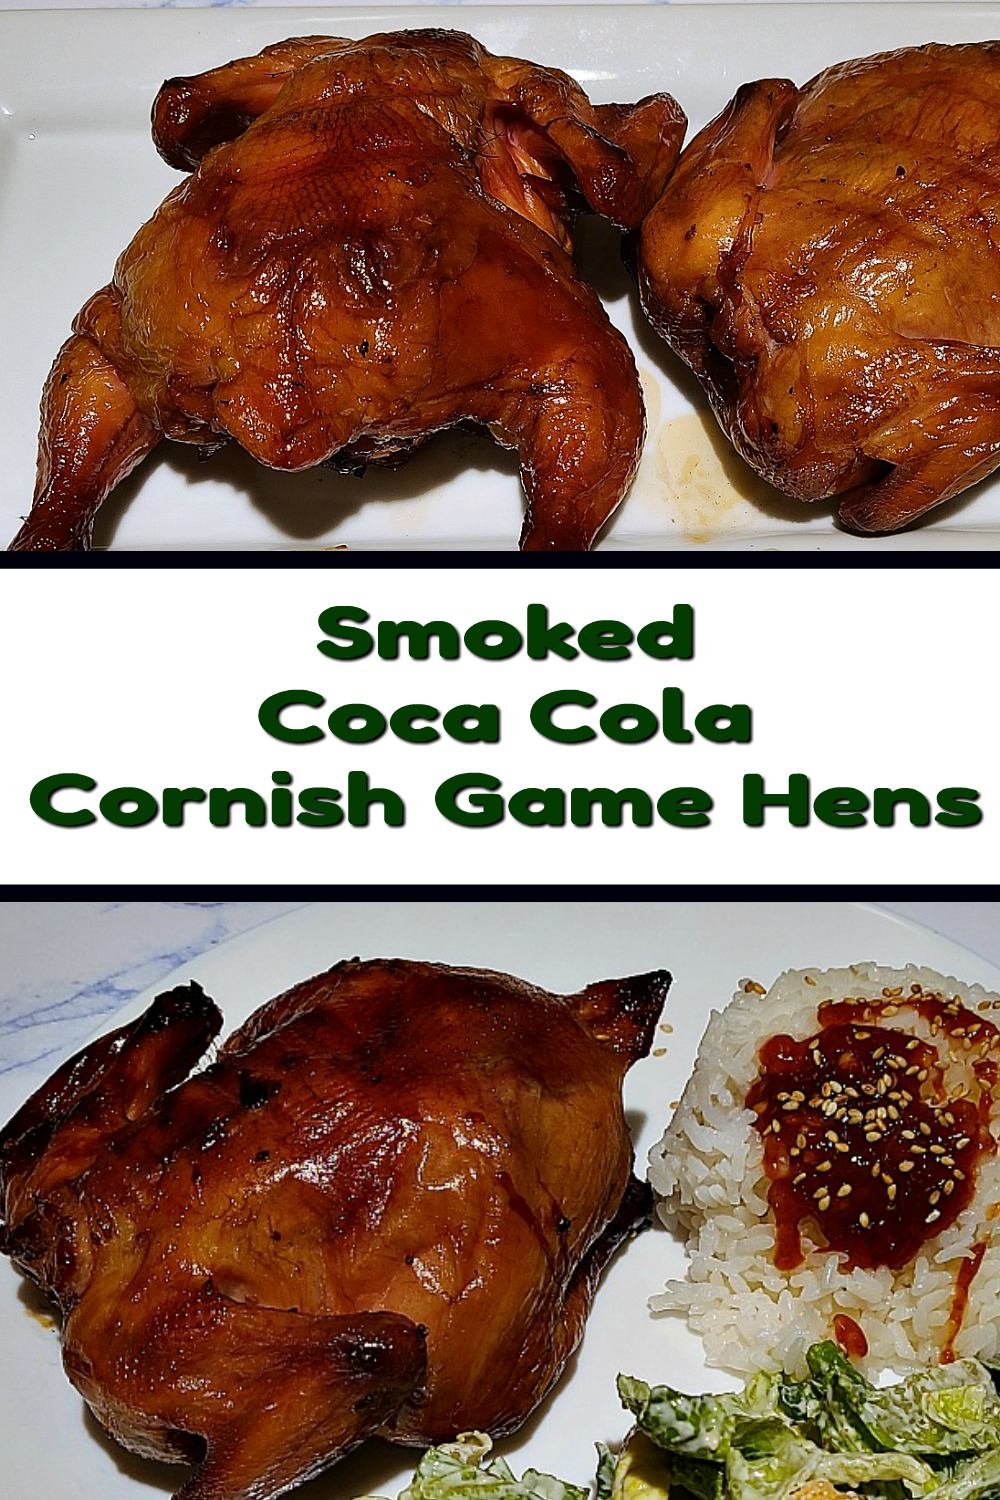 This Smoked Coca Cola Cornish Game Hens Recipe is perfect to make on your smoker! The Coca-Cola brine adds flavor and tenderness to the hens. Using a brine allows the meat to tenderize but also adds flavor as well.